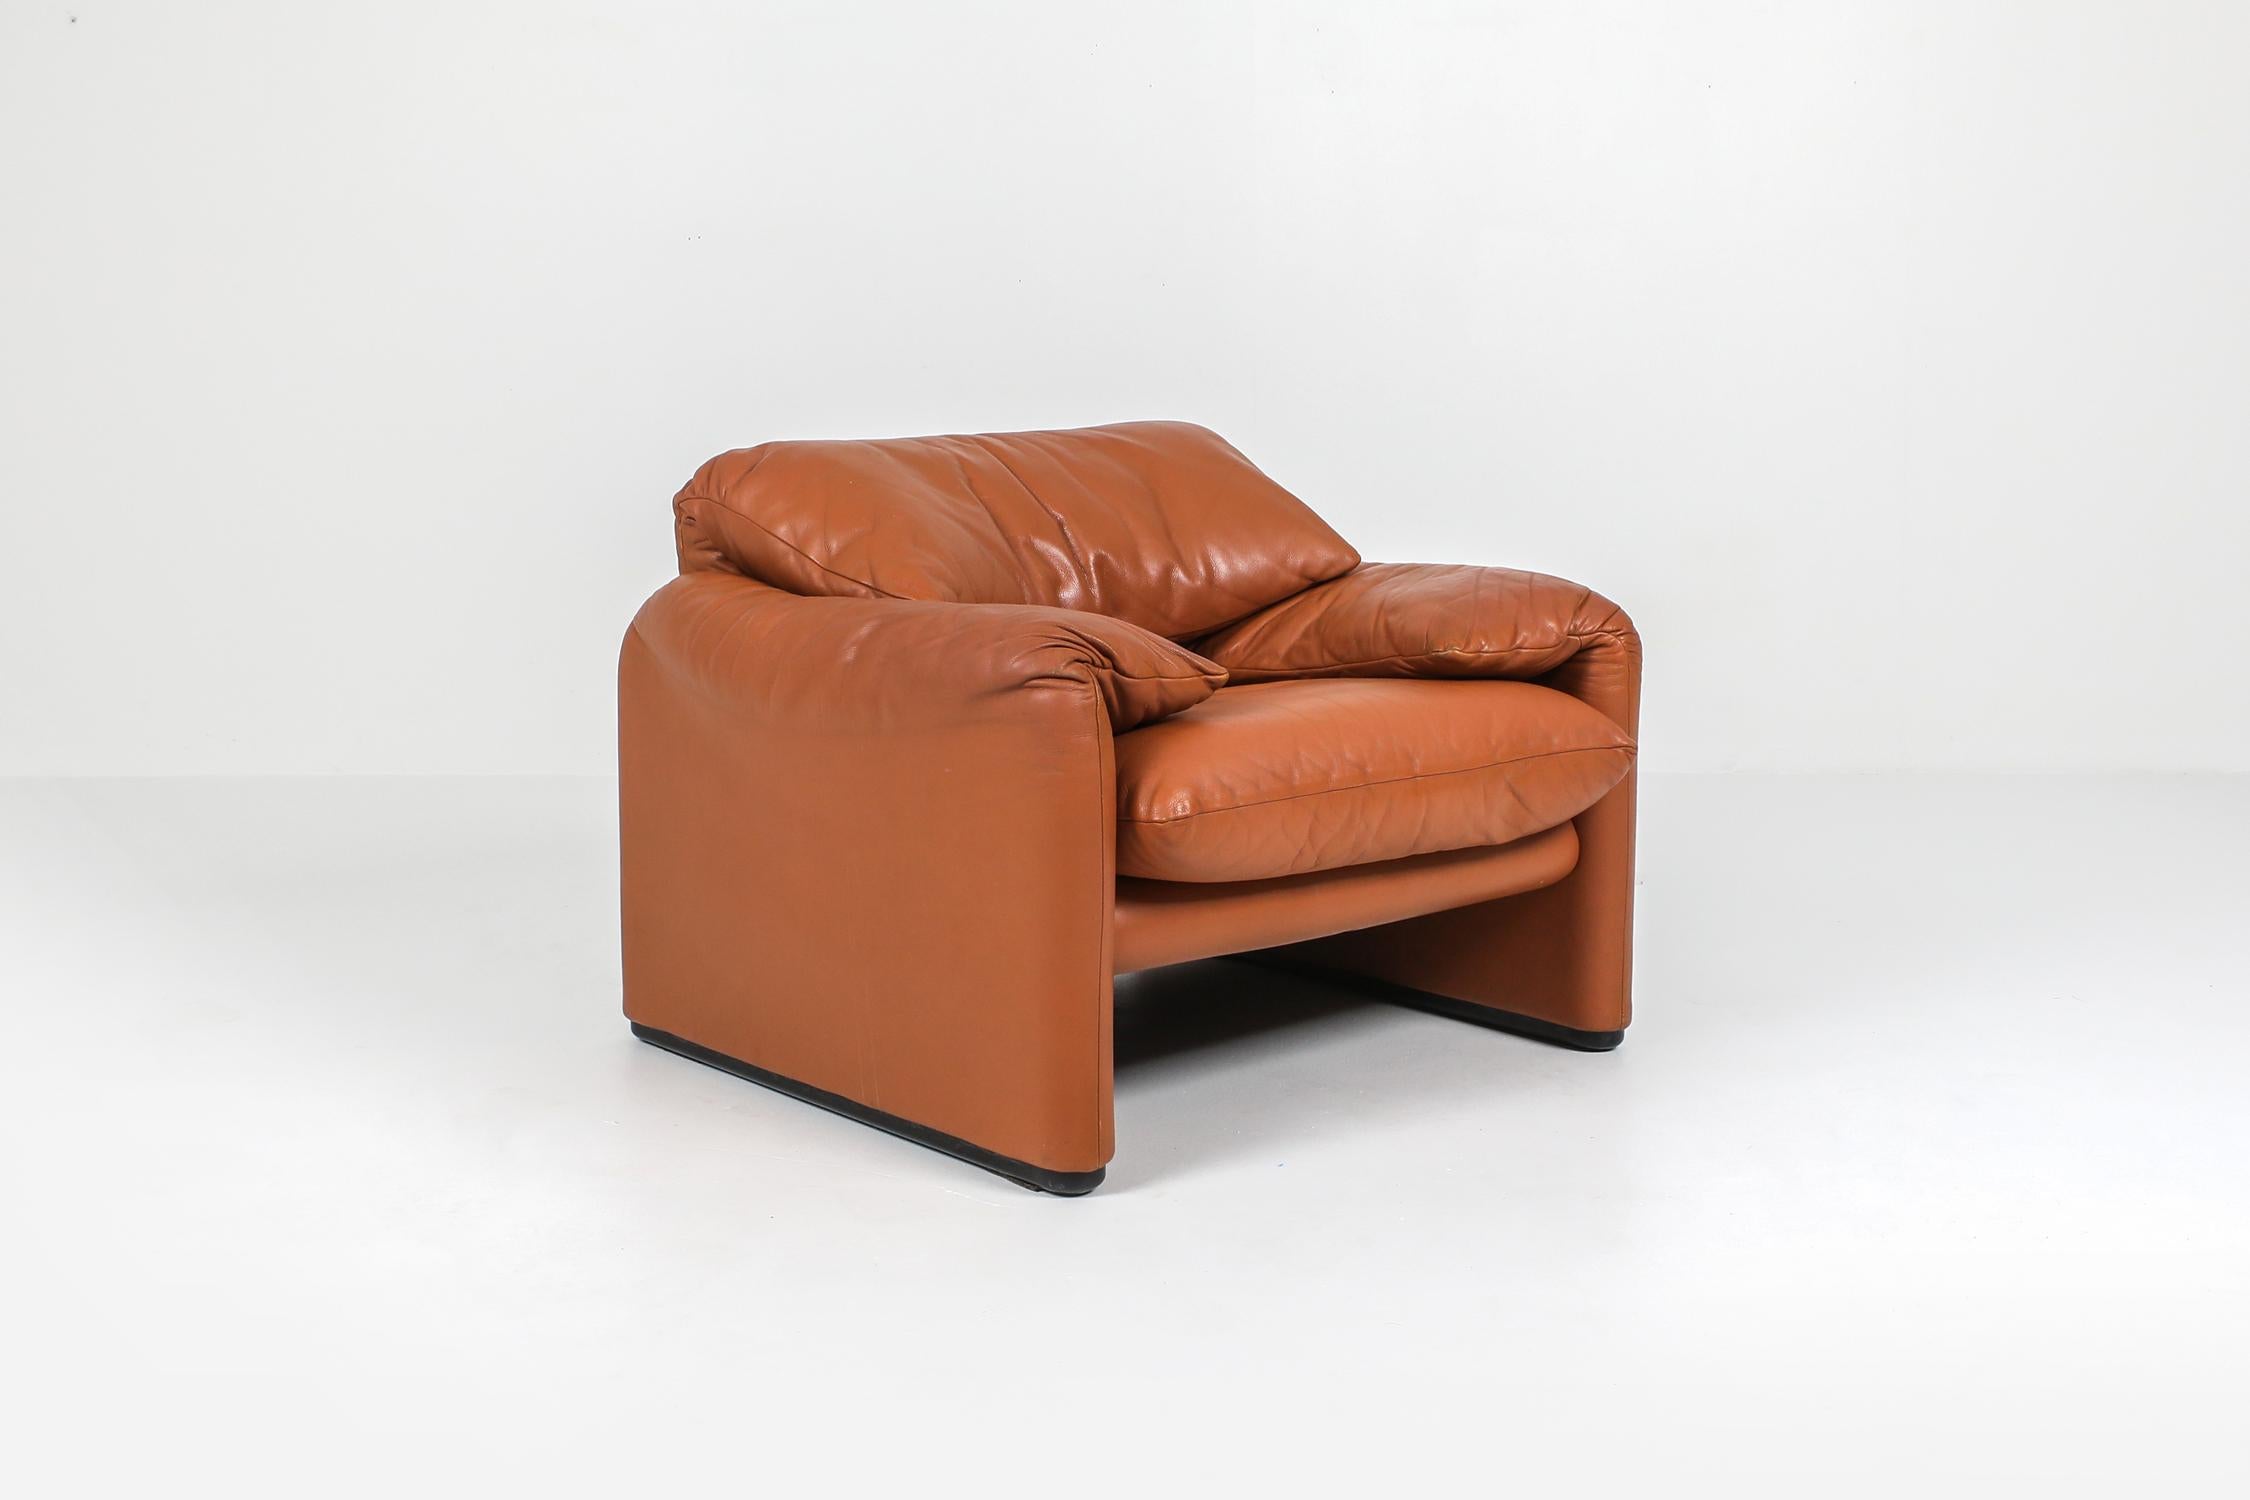 Vico Magistretti, Maralunga lounge chair, Cassina, Italy, 1974

Maralunga Classico: Comfort made manifest in one great design. Compasso d’Oro in 1979, and naturally spawned countless imitations. Armchair, ottoman and two or three-seat sofas. Steel